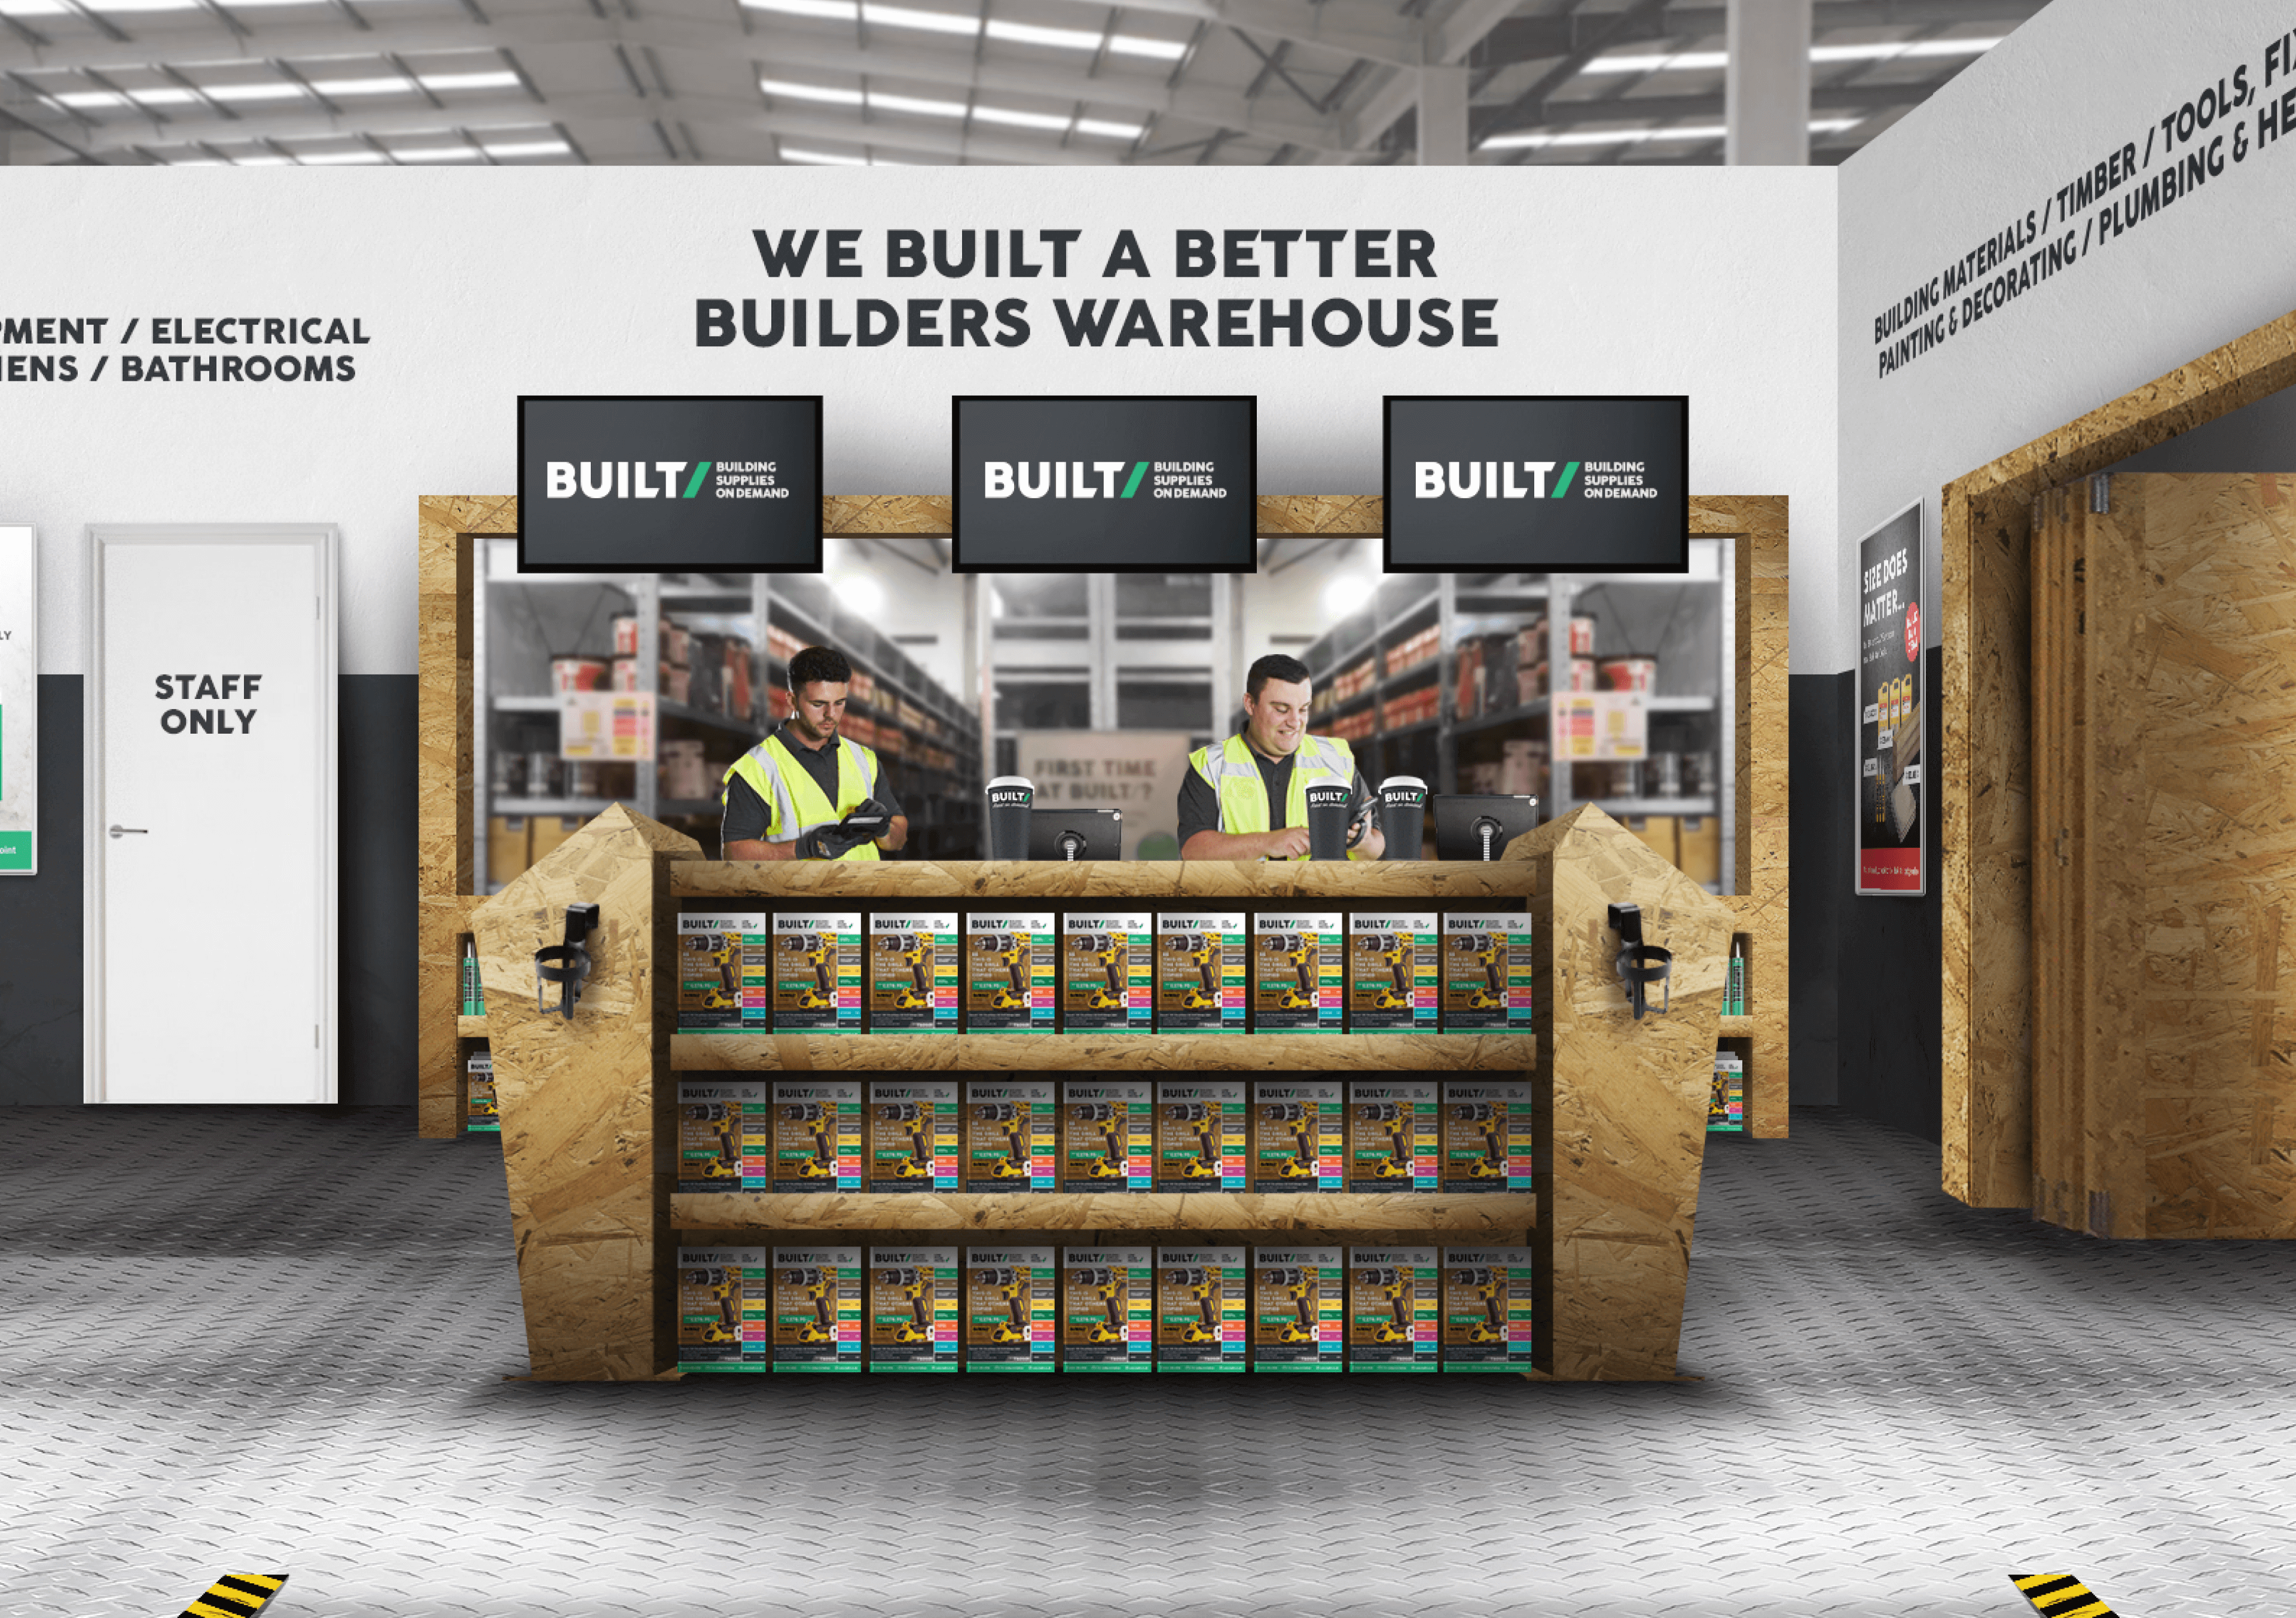 Small store visualisation for a Built builders merchant showing employees standing behind a catalogue showcase counter